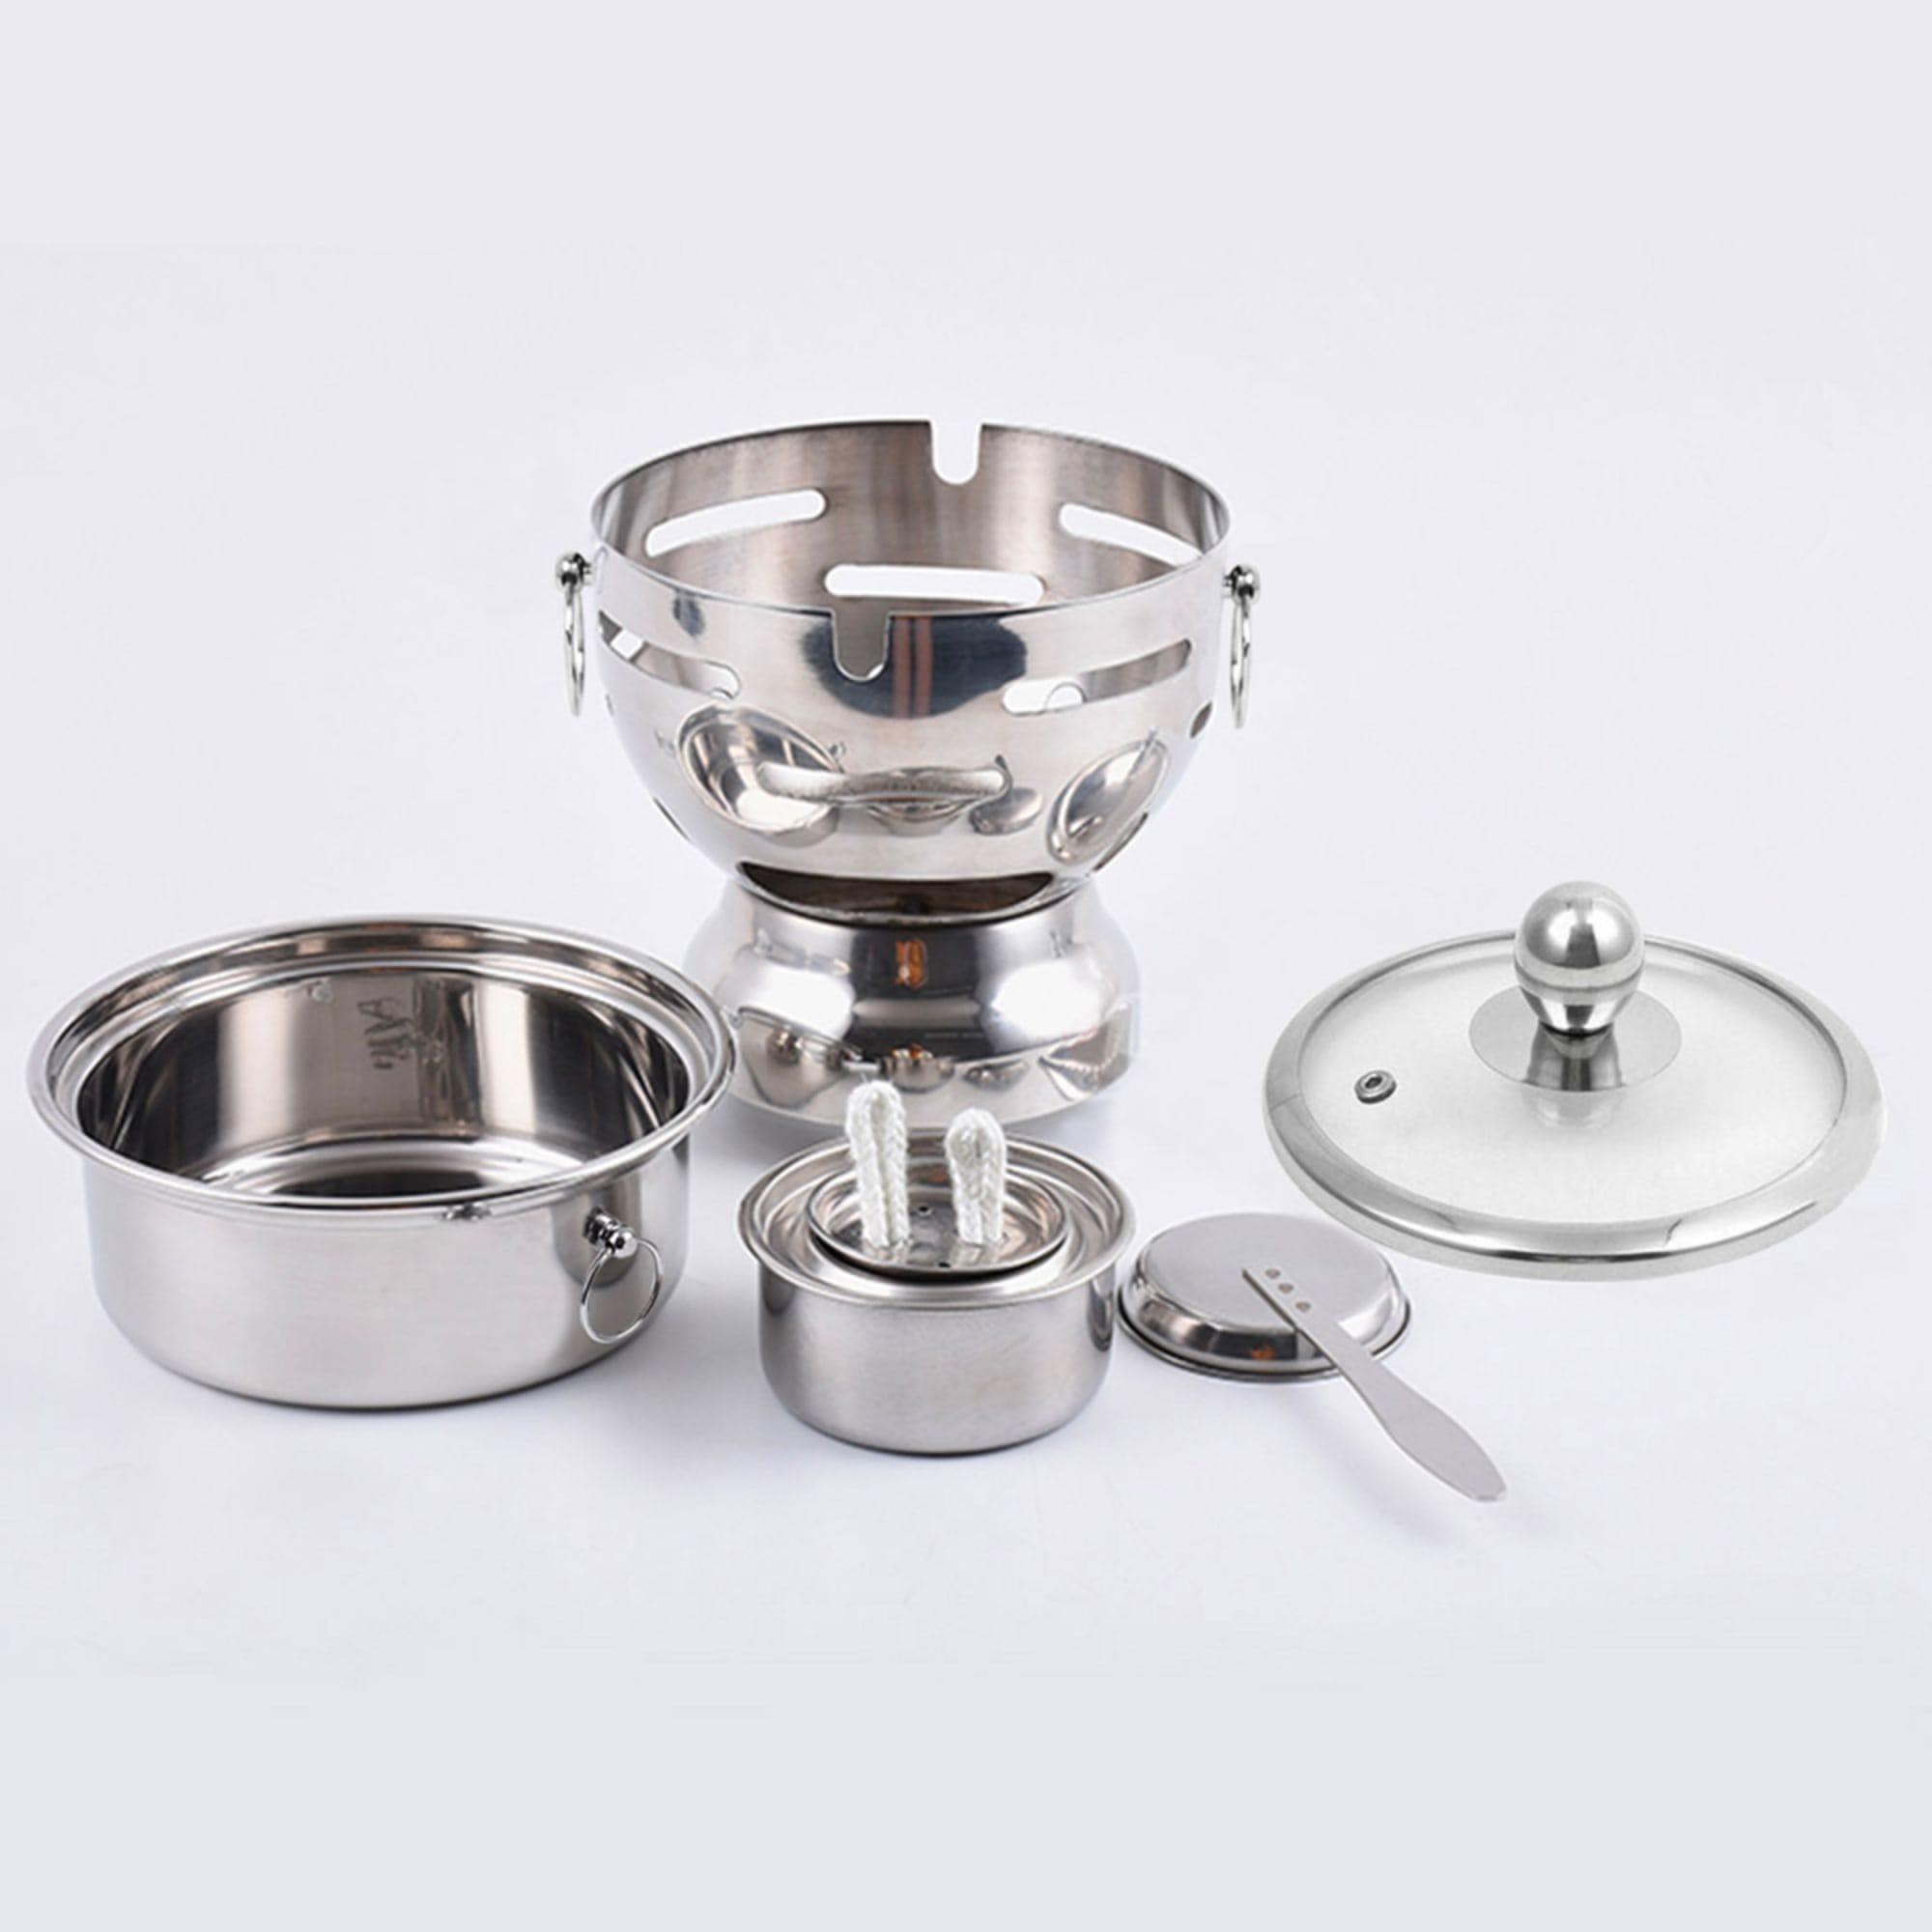 Soga Round Stainless Steel Single Hot Pot with Glass Lid 18.5cm Set of 2 Image 5